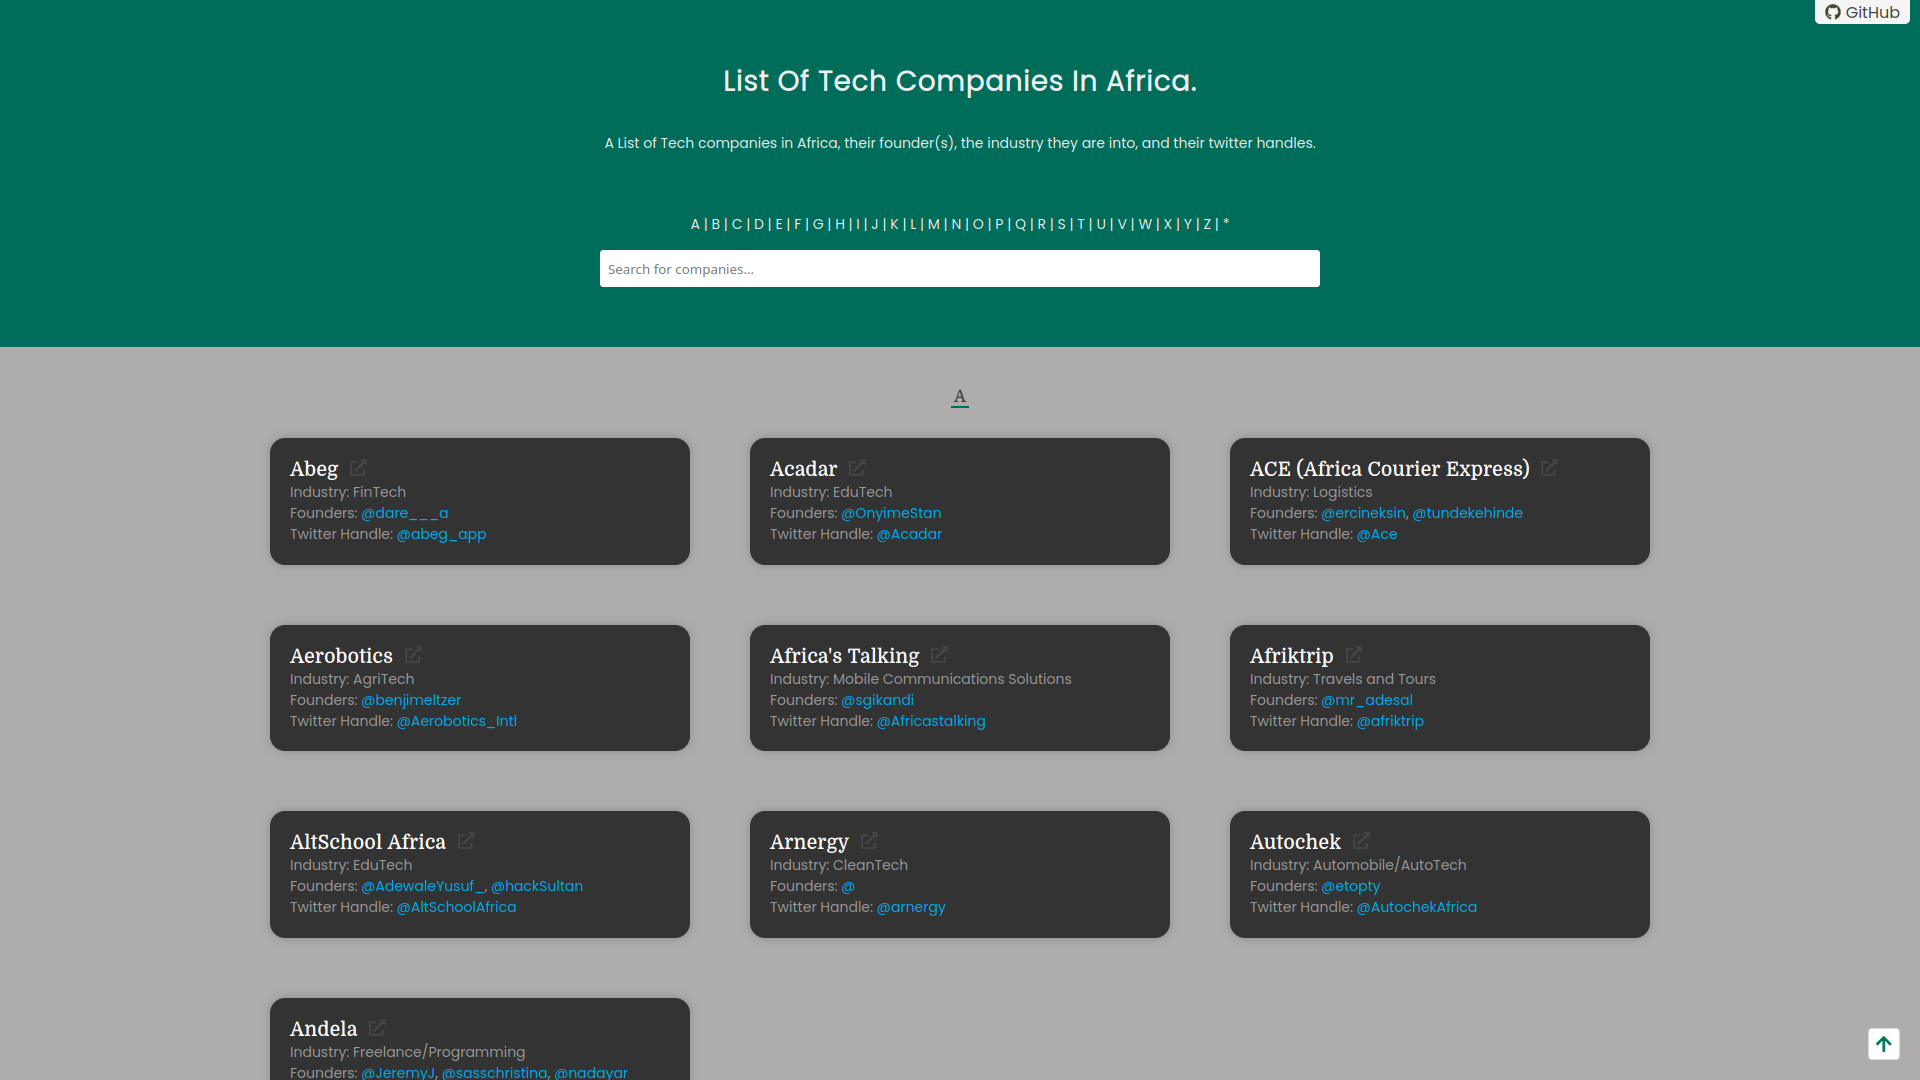 The landing page of tech-companies-in-africa